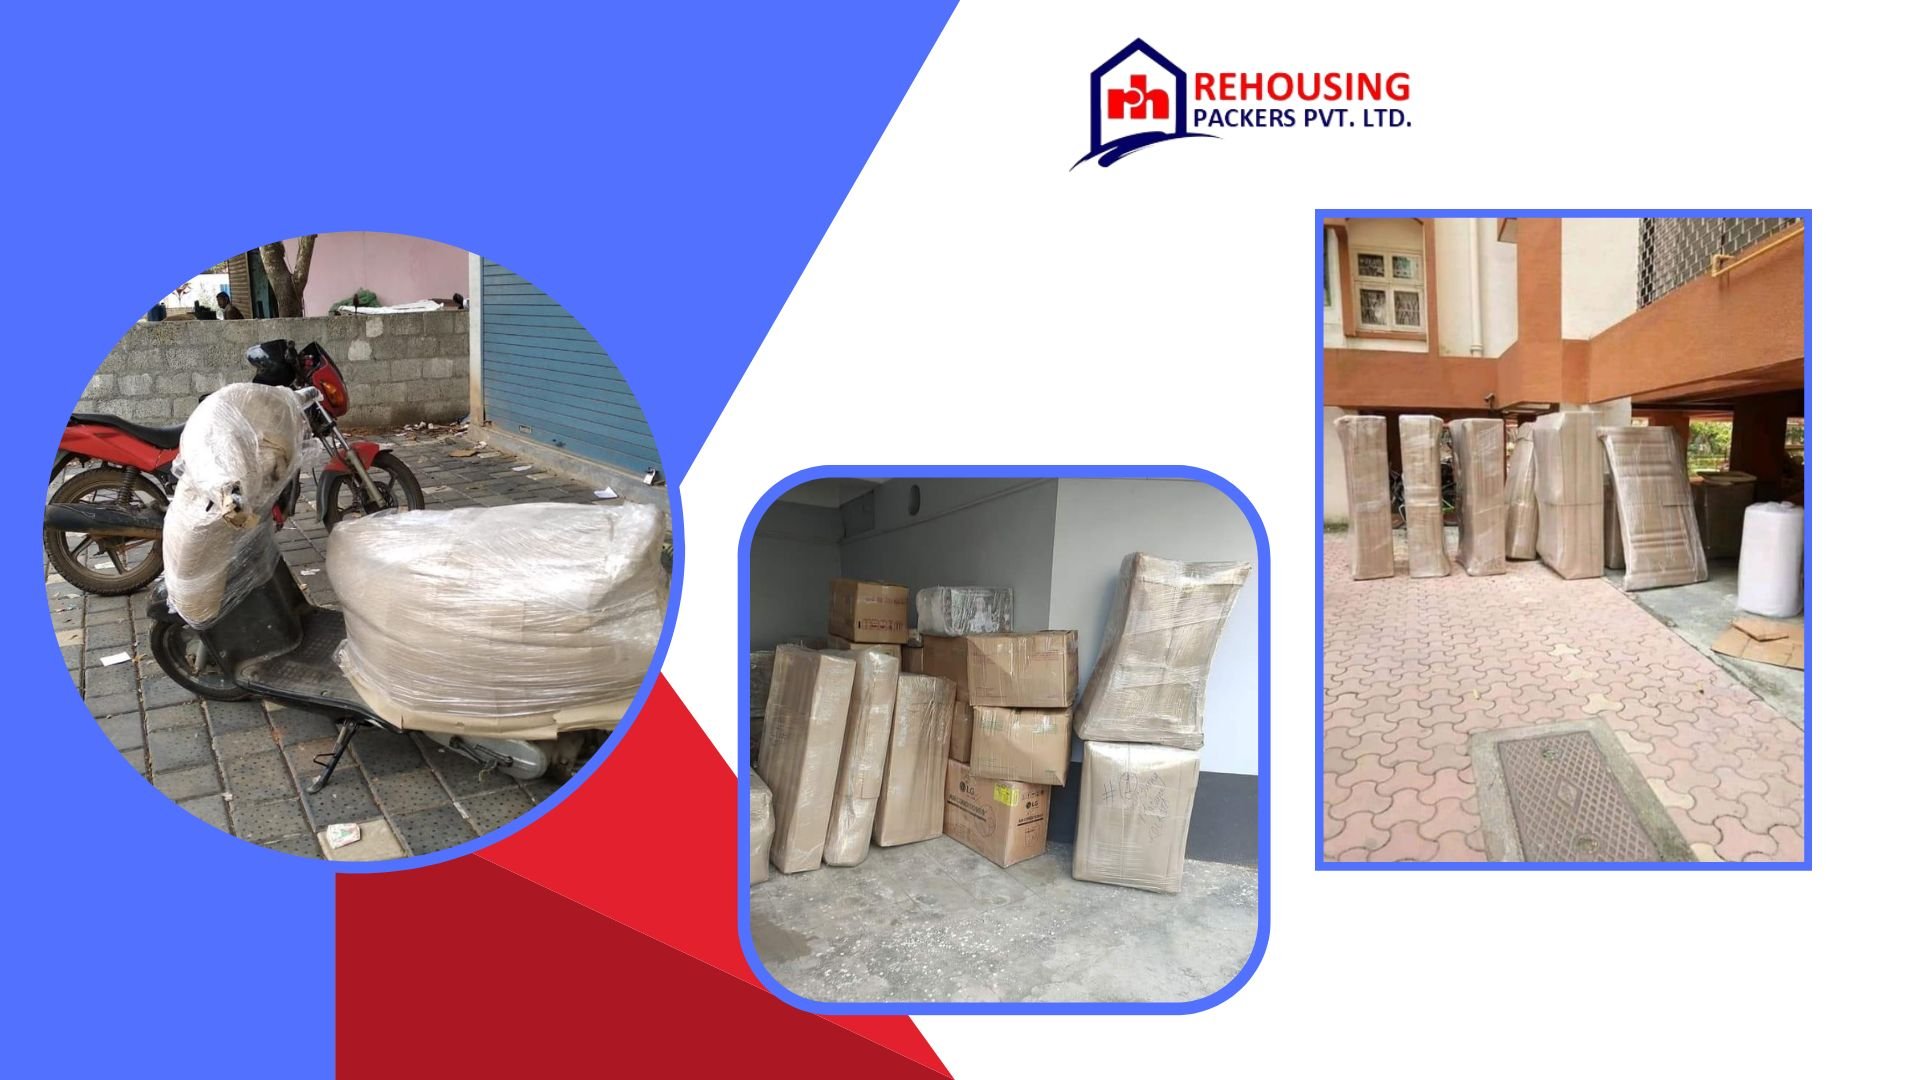 Packers and Movers in Chitpady | Rehousing packers